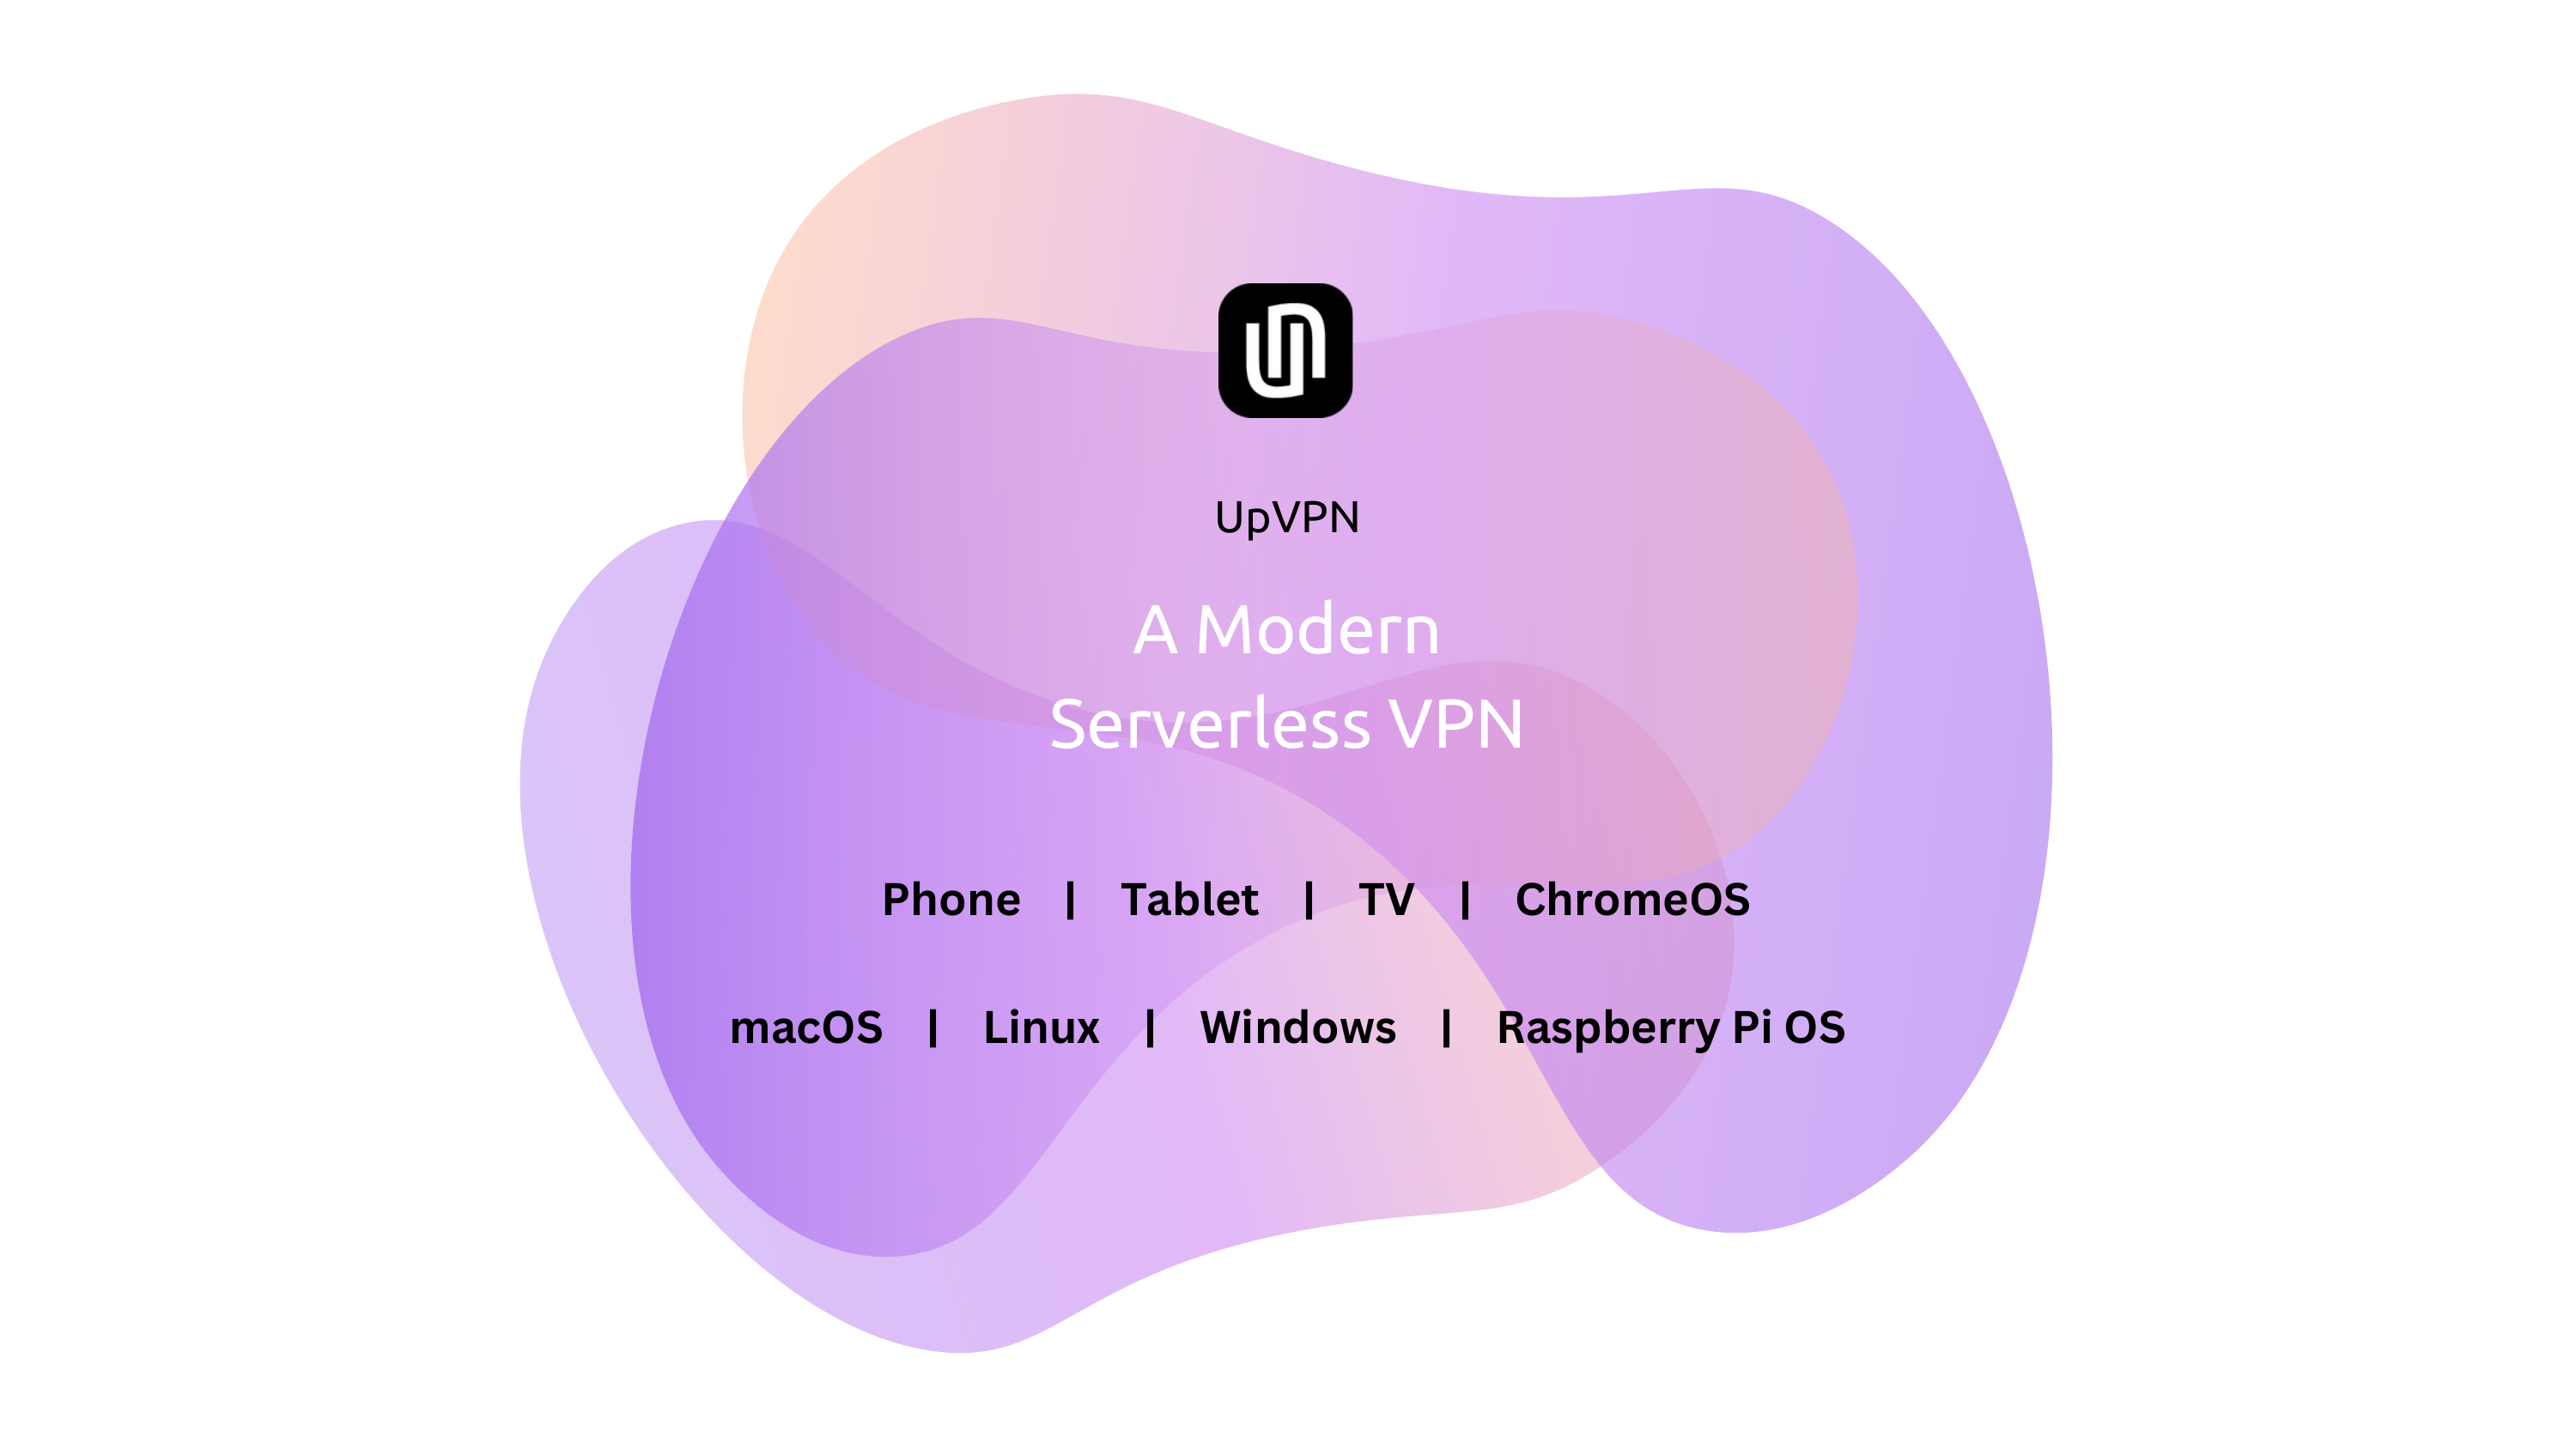 A Modern Serverless VPN for Android, iOS, Mac, Windows, and Linux